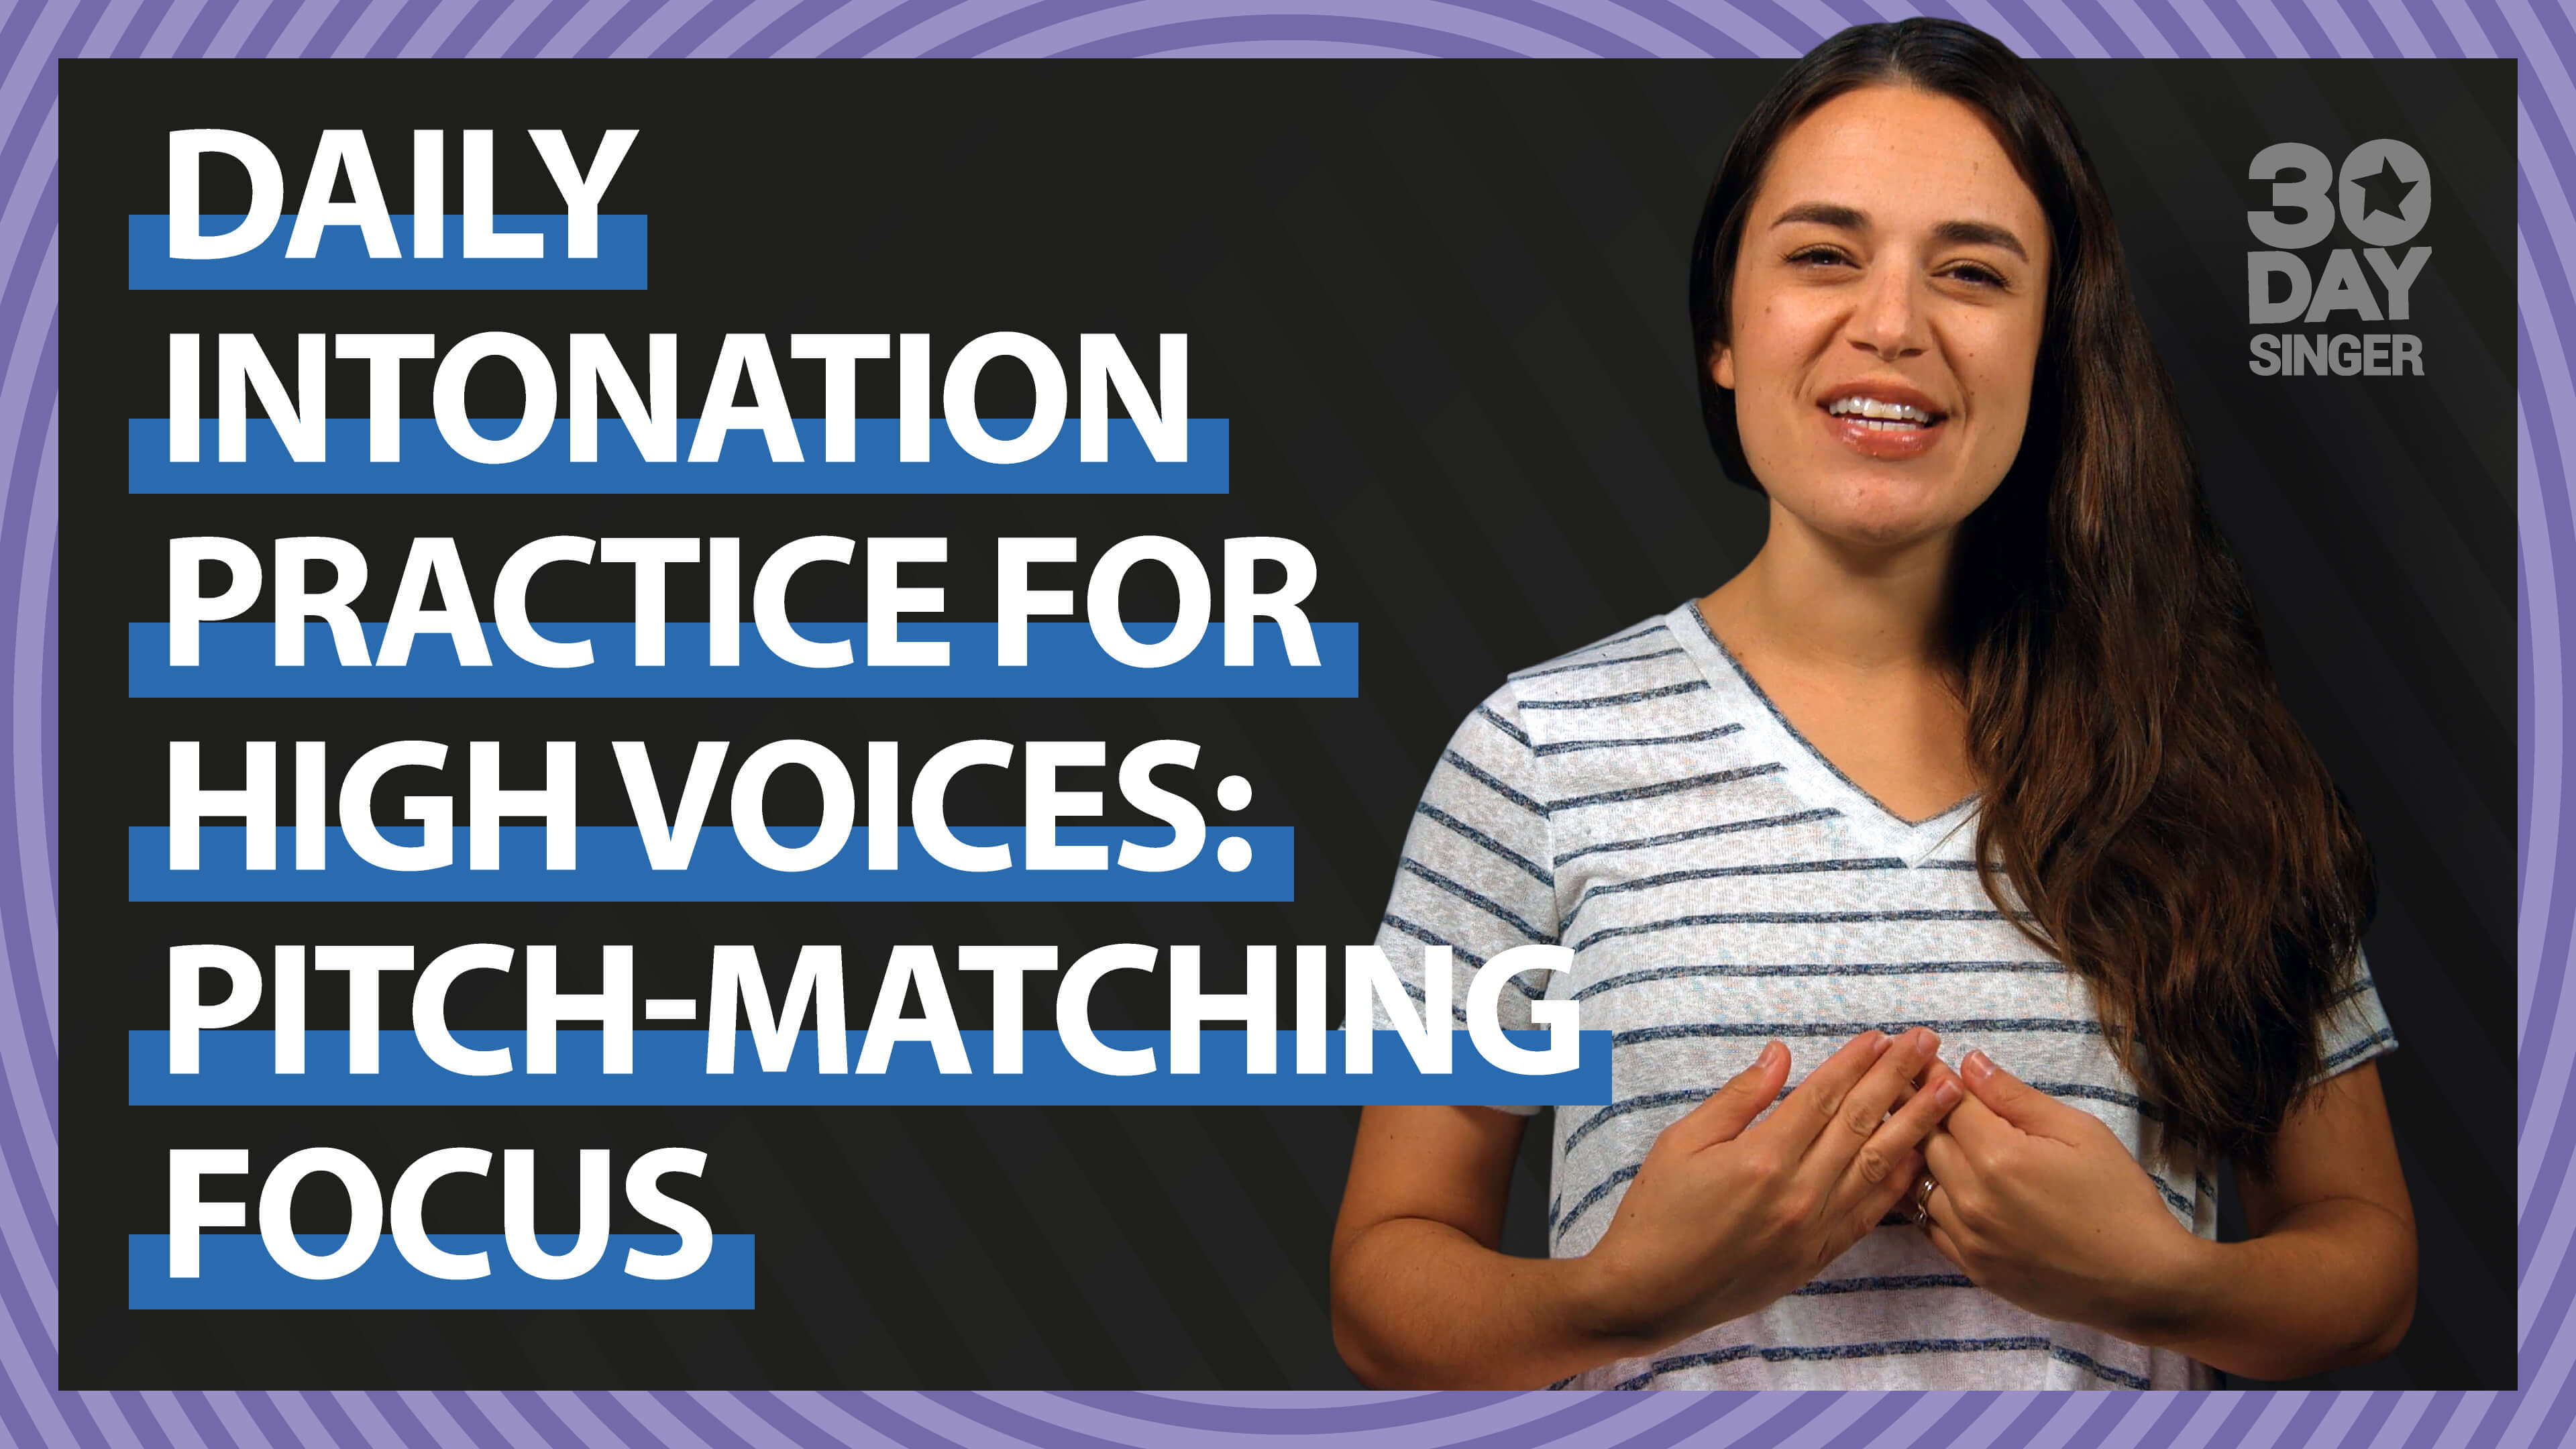 Daily Intonation Practice For High Voices : Pitch Matching Focus